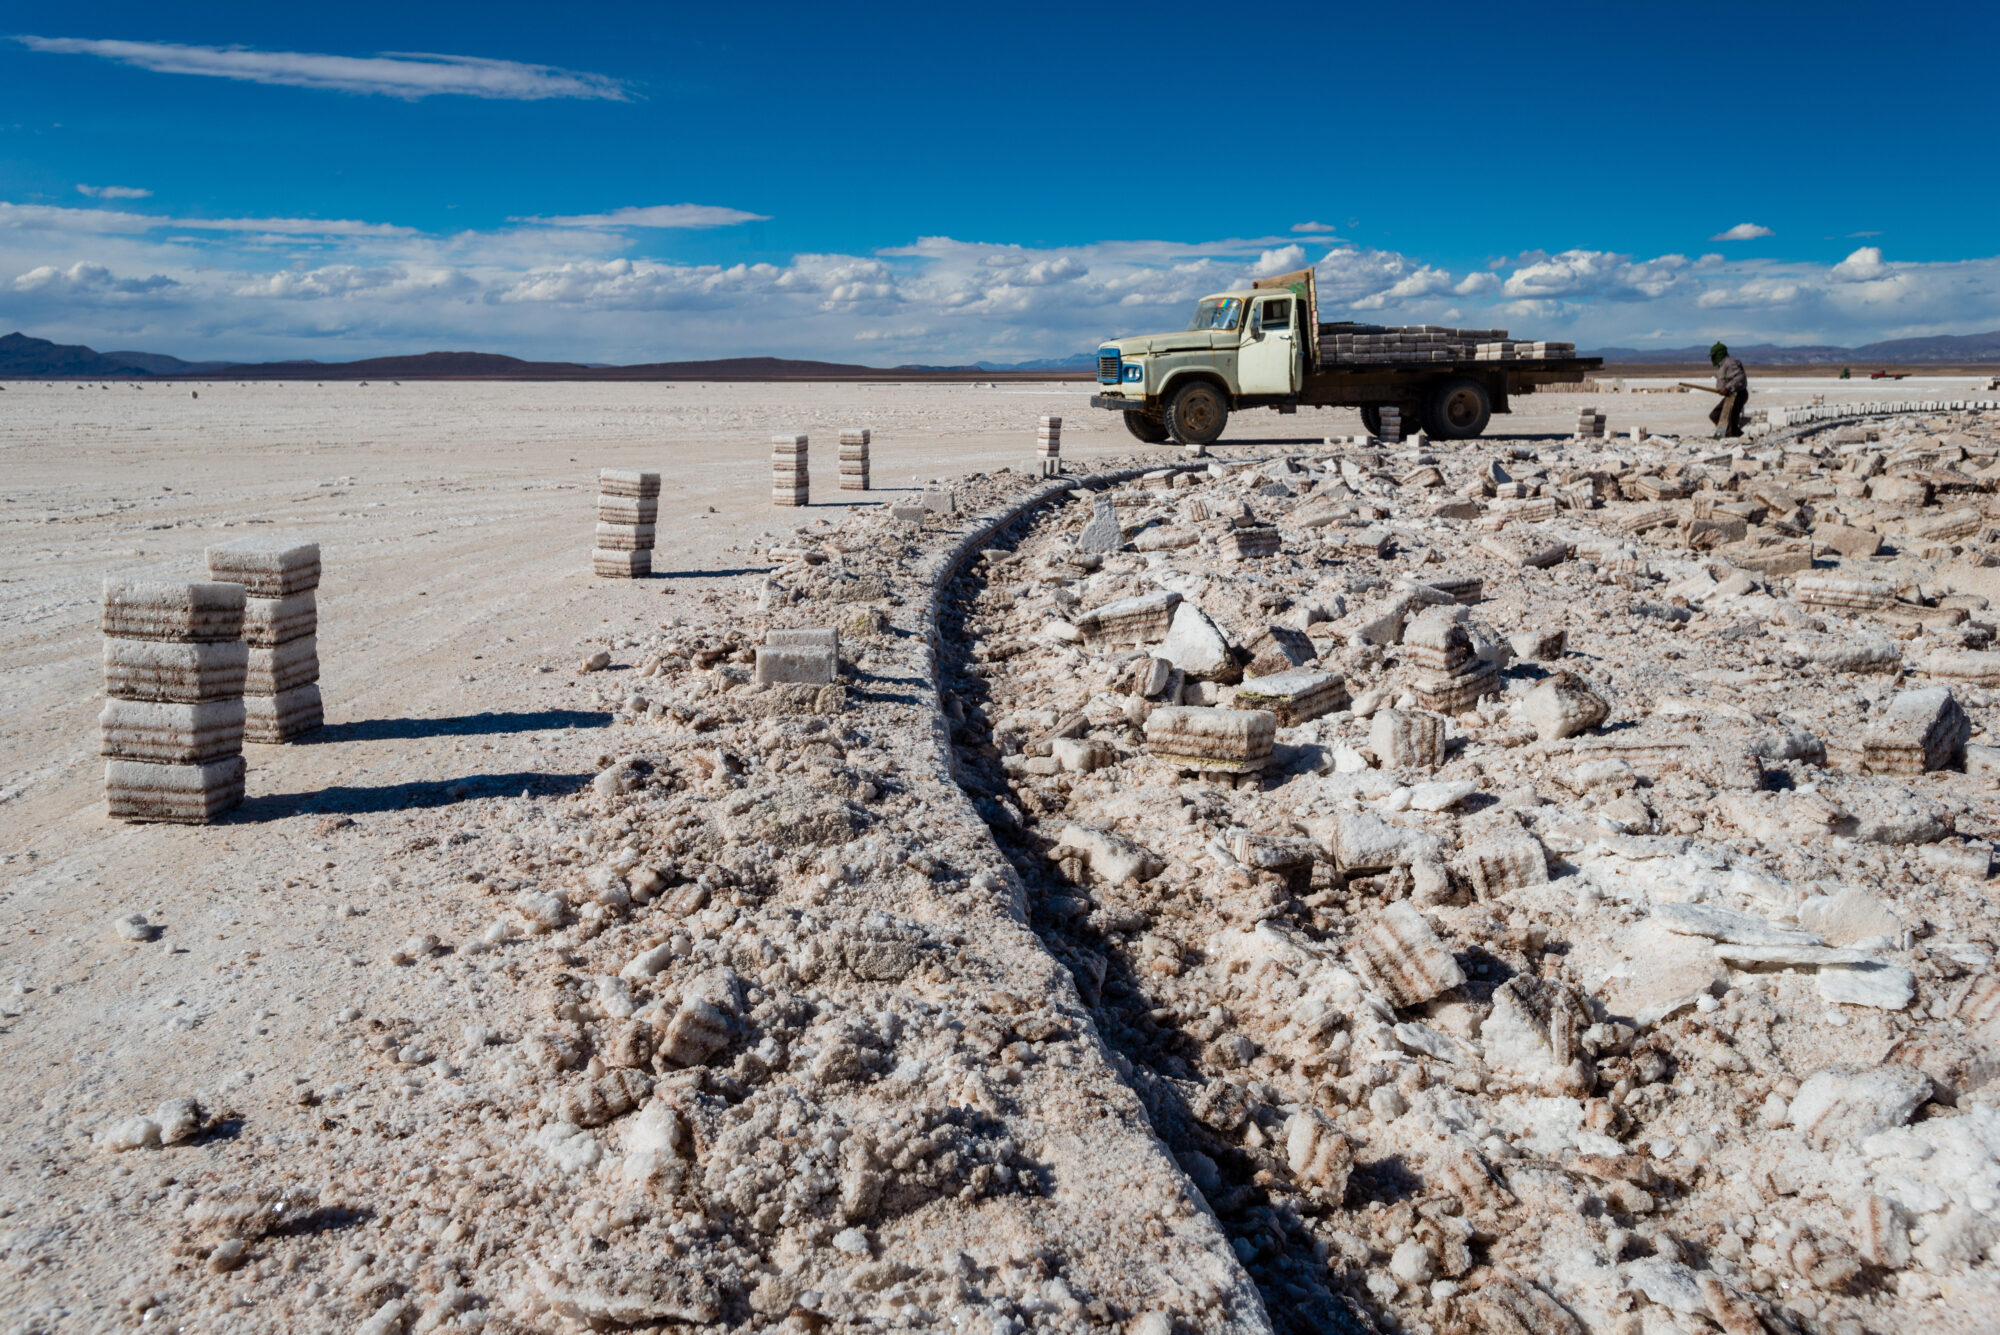 a pick-up truck at a lithium mining site